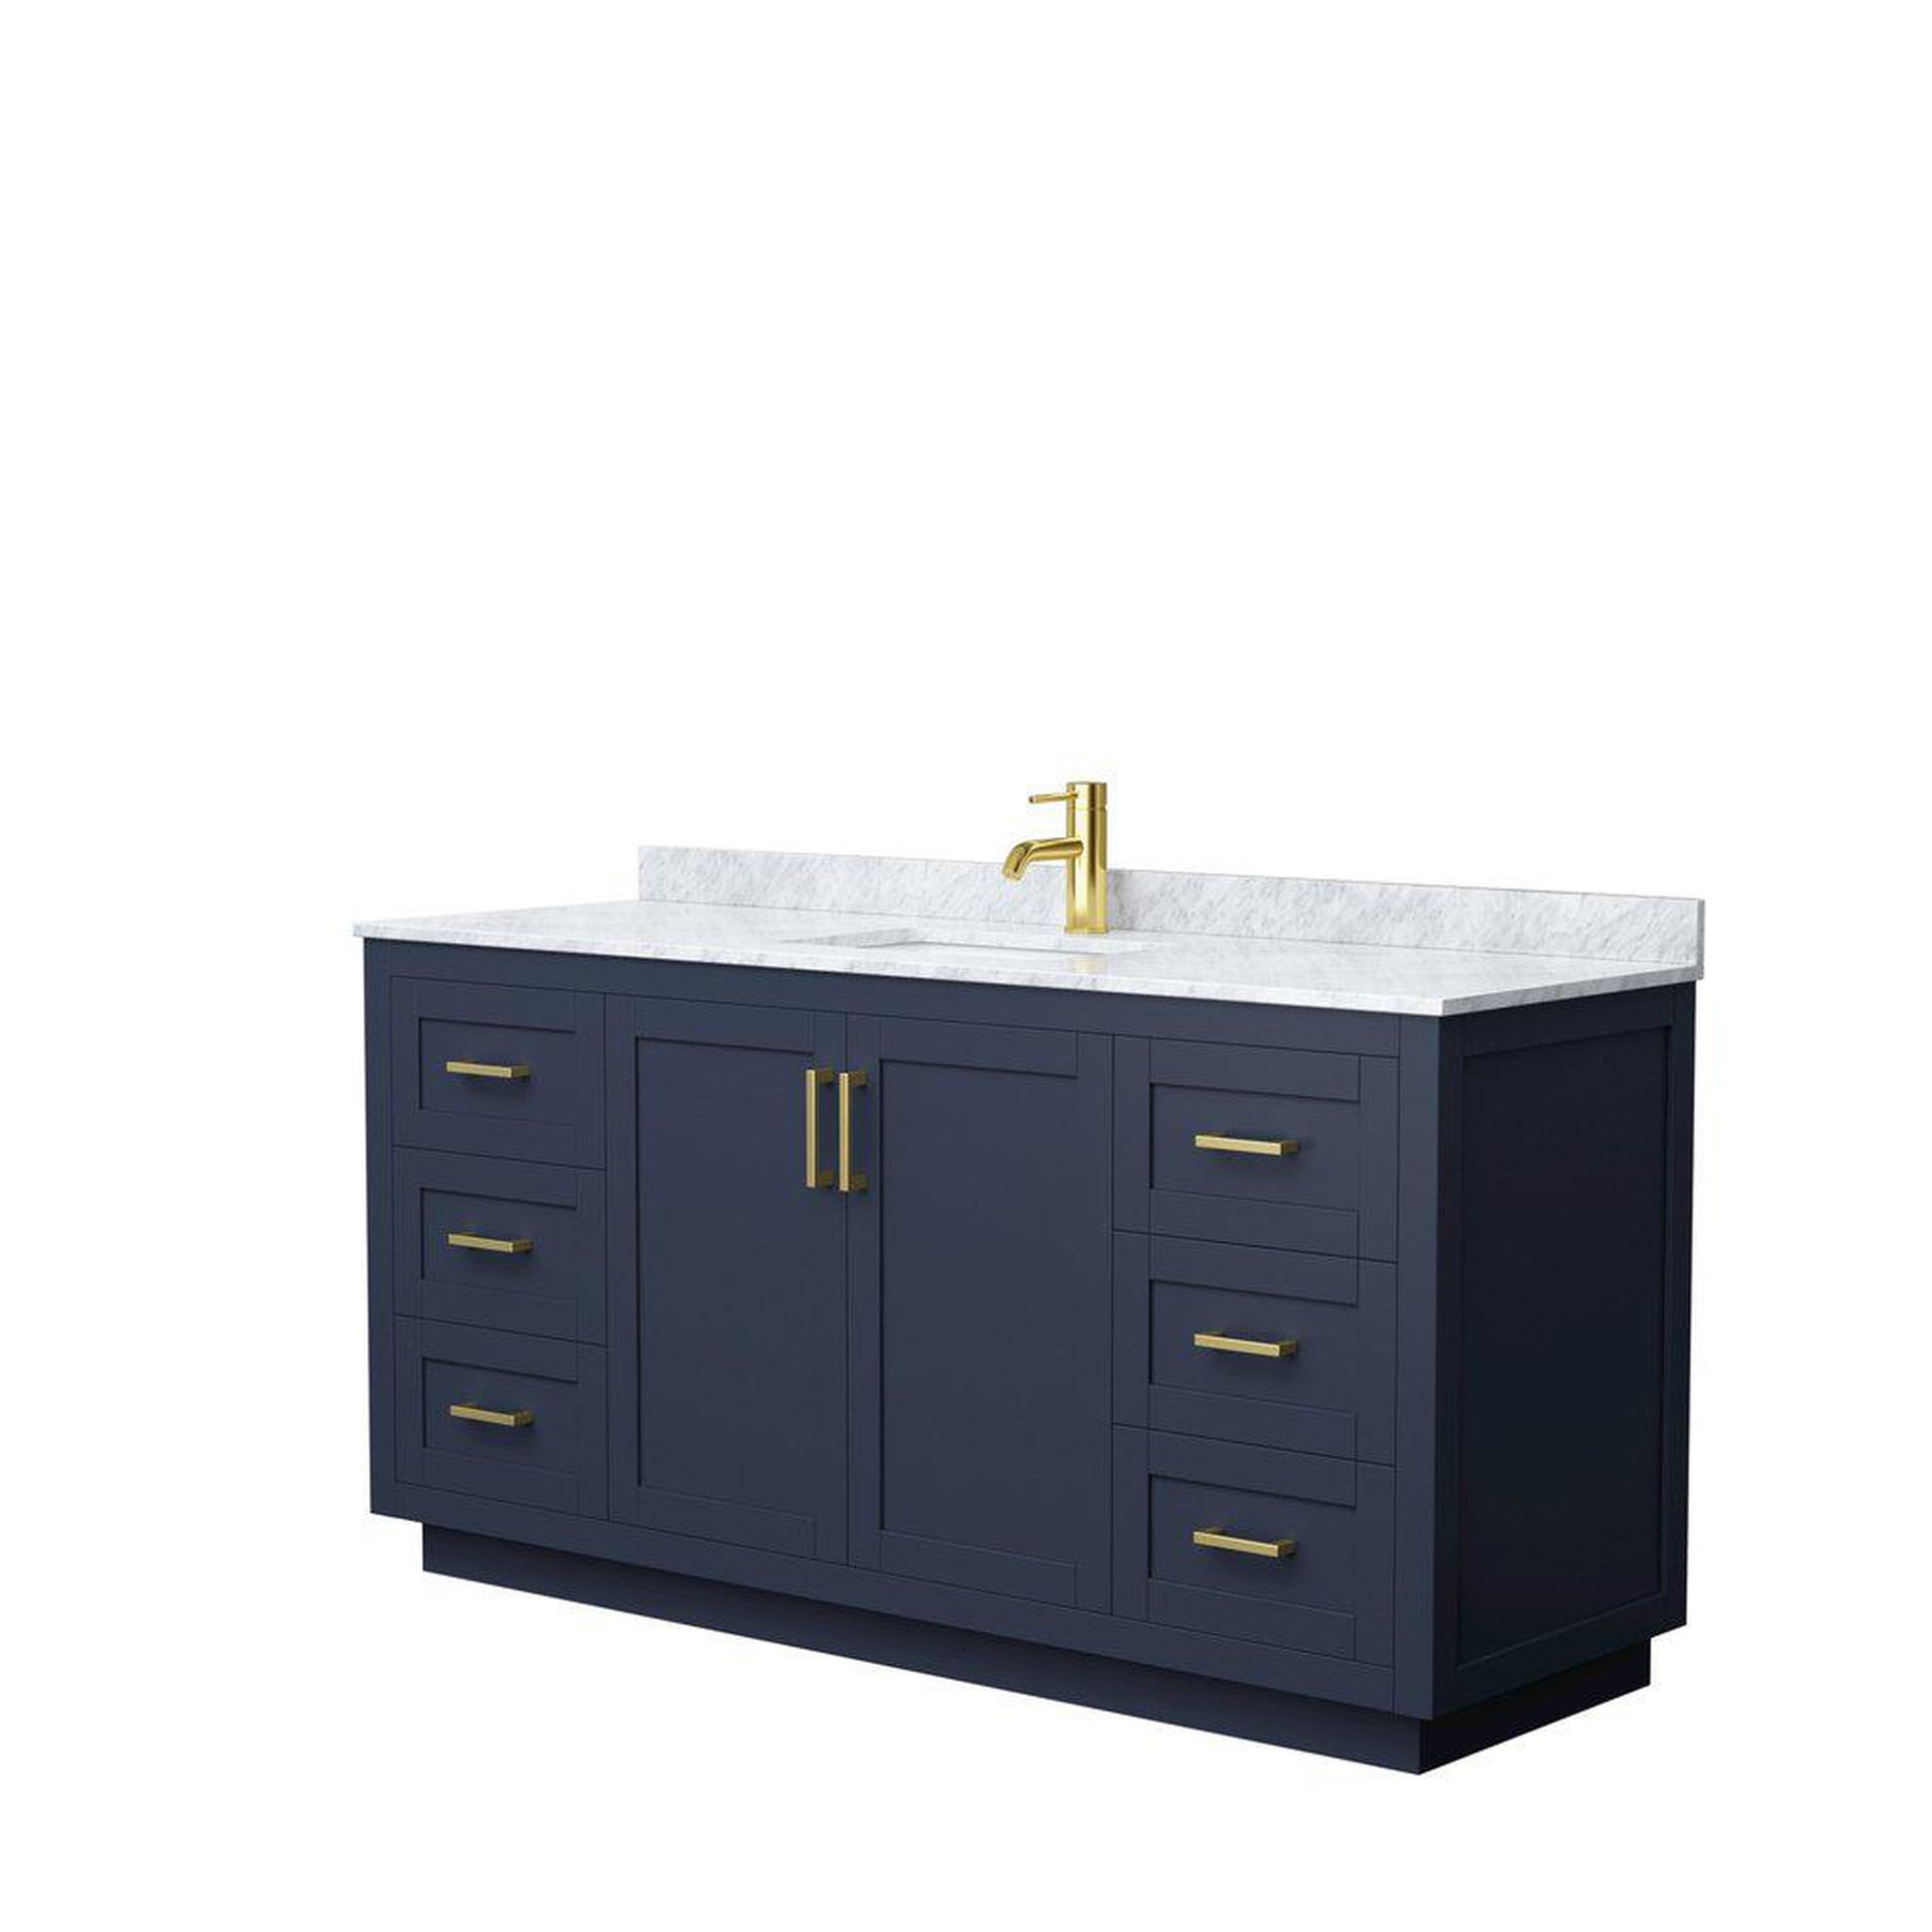 Wyndham Collection Miranda 66" Single Bathroom Dark Blue Vanity Set With White Carrara Marble Countertop, Undermount Square Sink, And Brushed Gold Trim